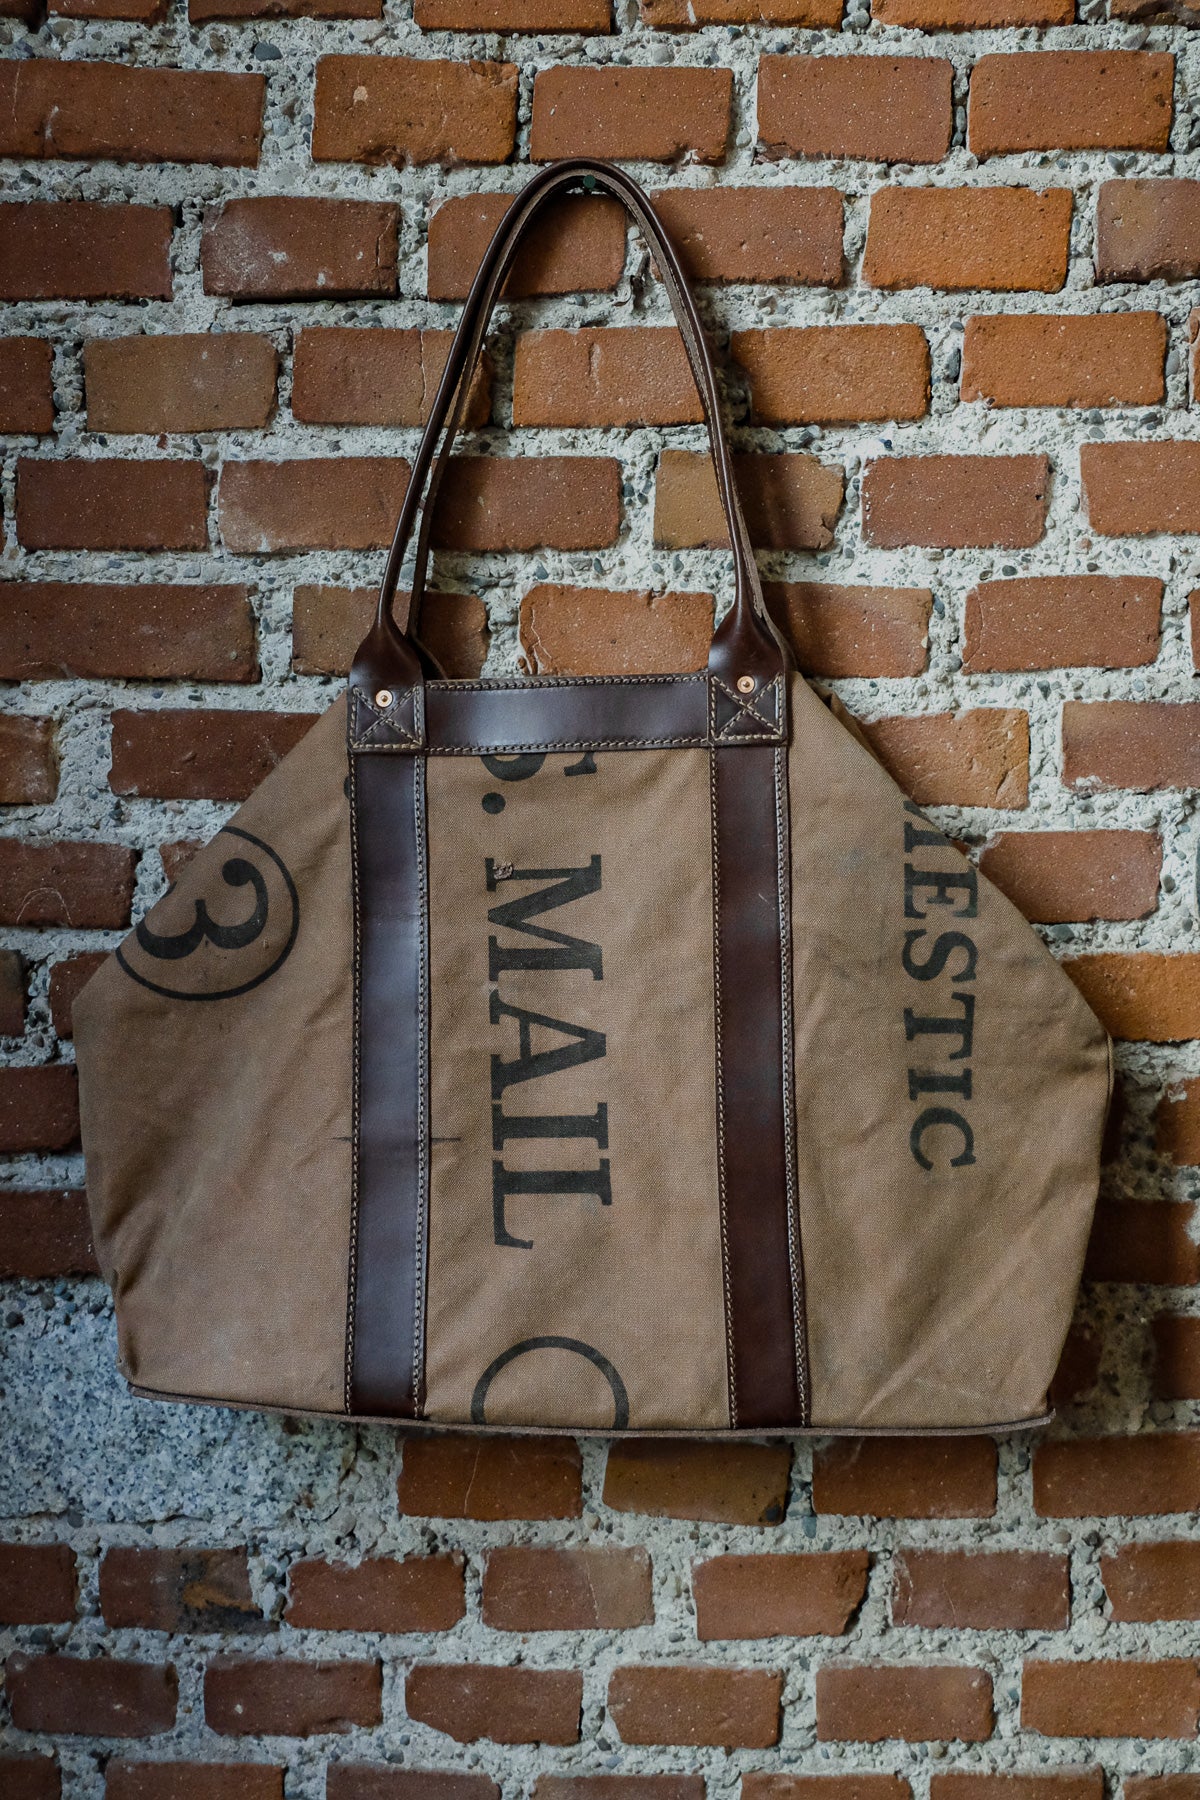 Actawl x The Rugged Society - Reworked Vintage US Mail Heavy Canvas Tote Carrier Bag